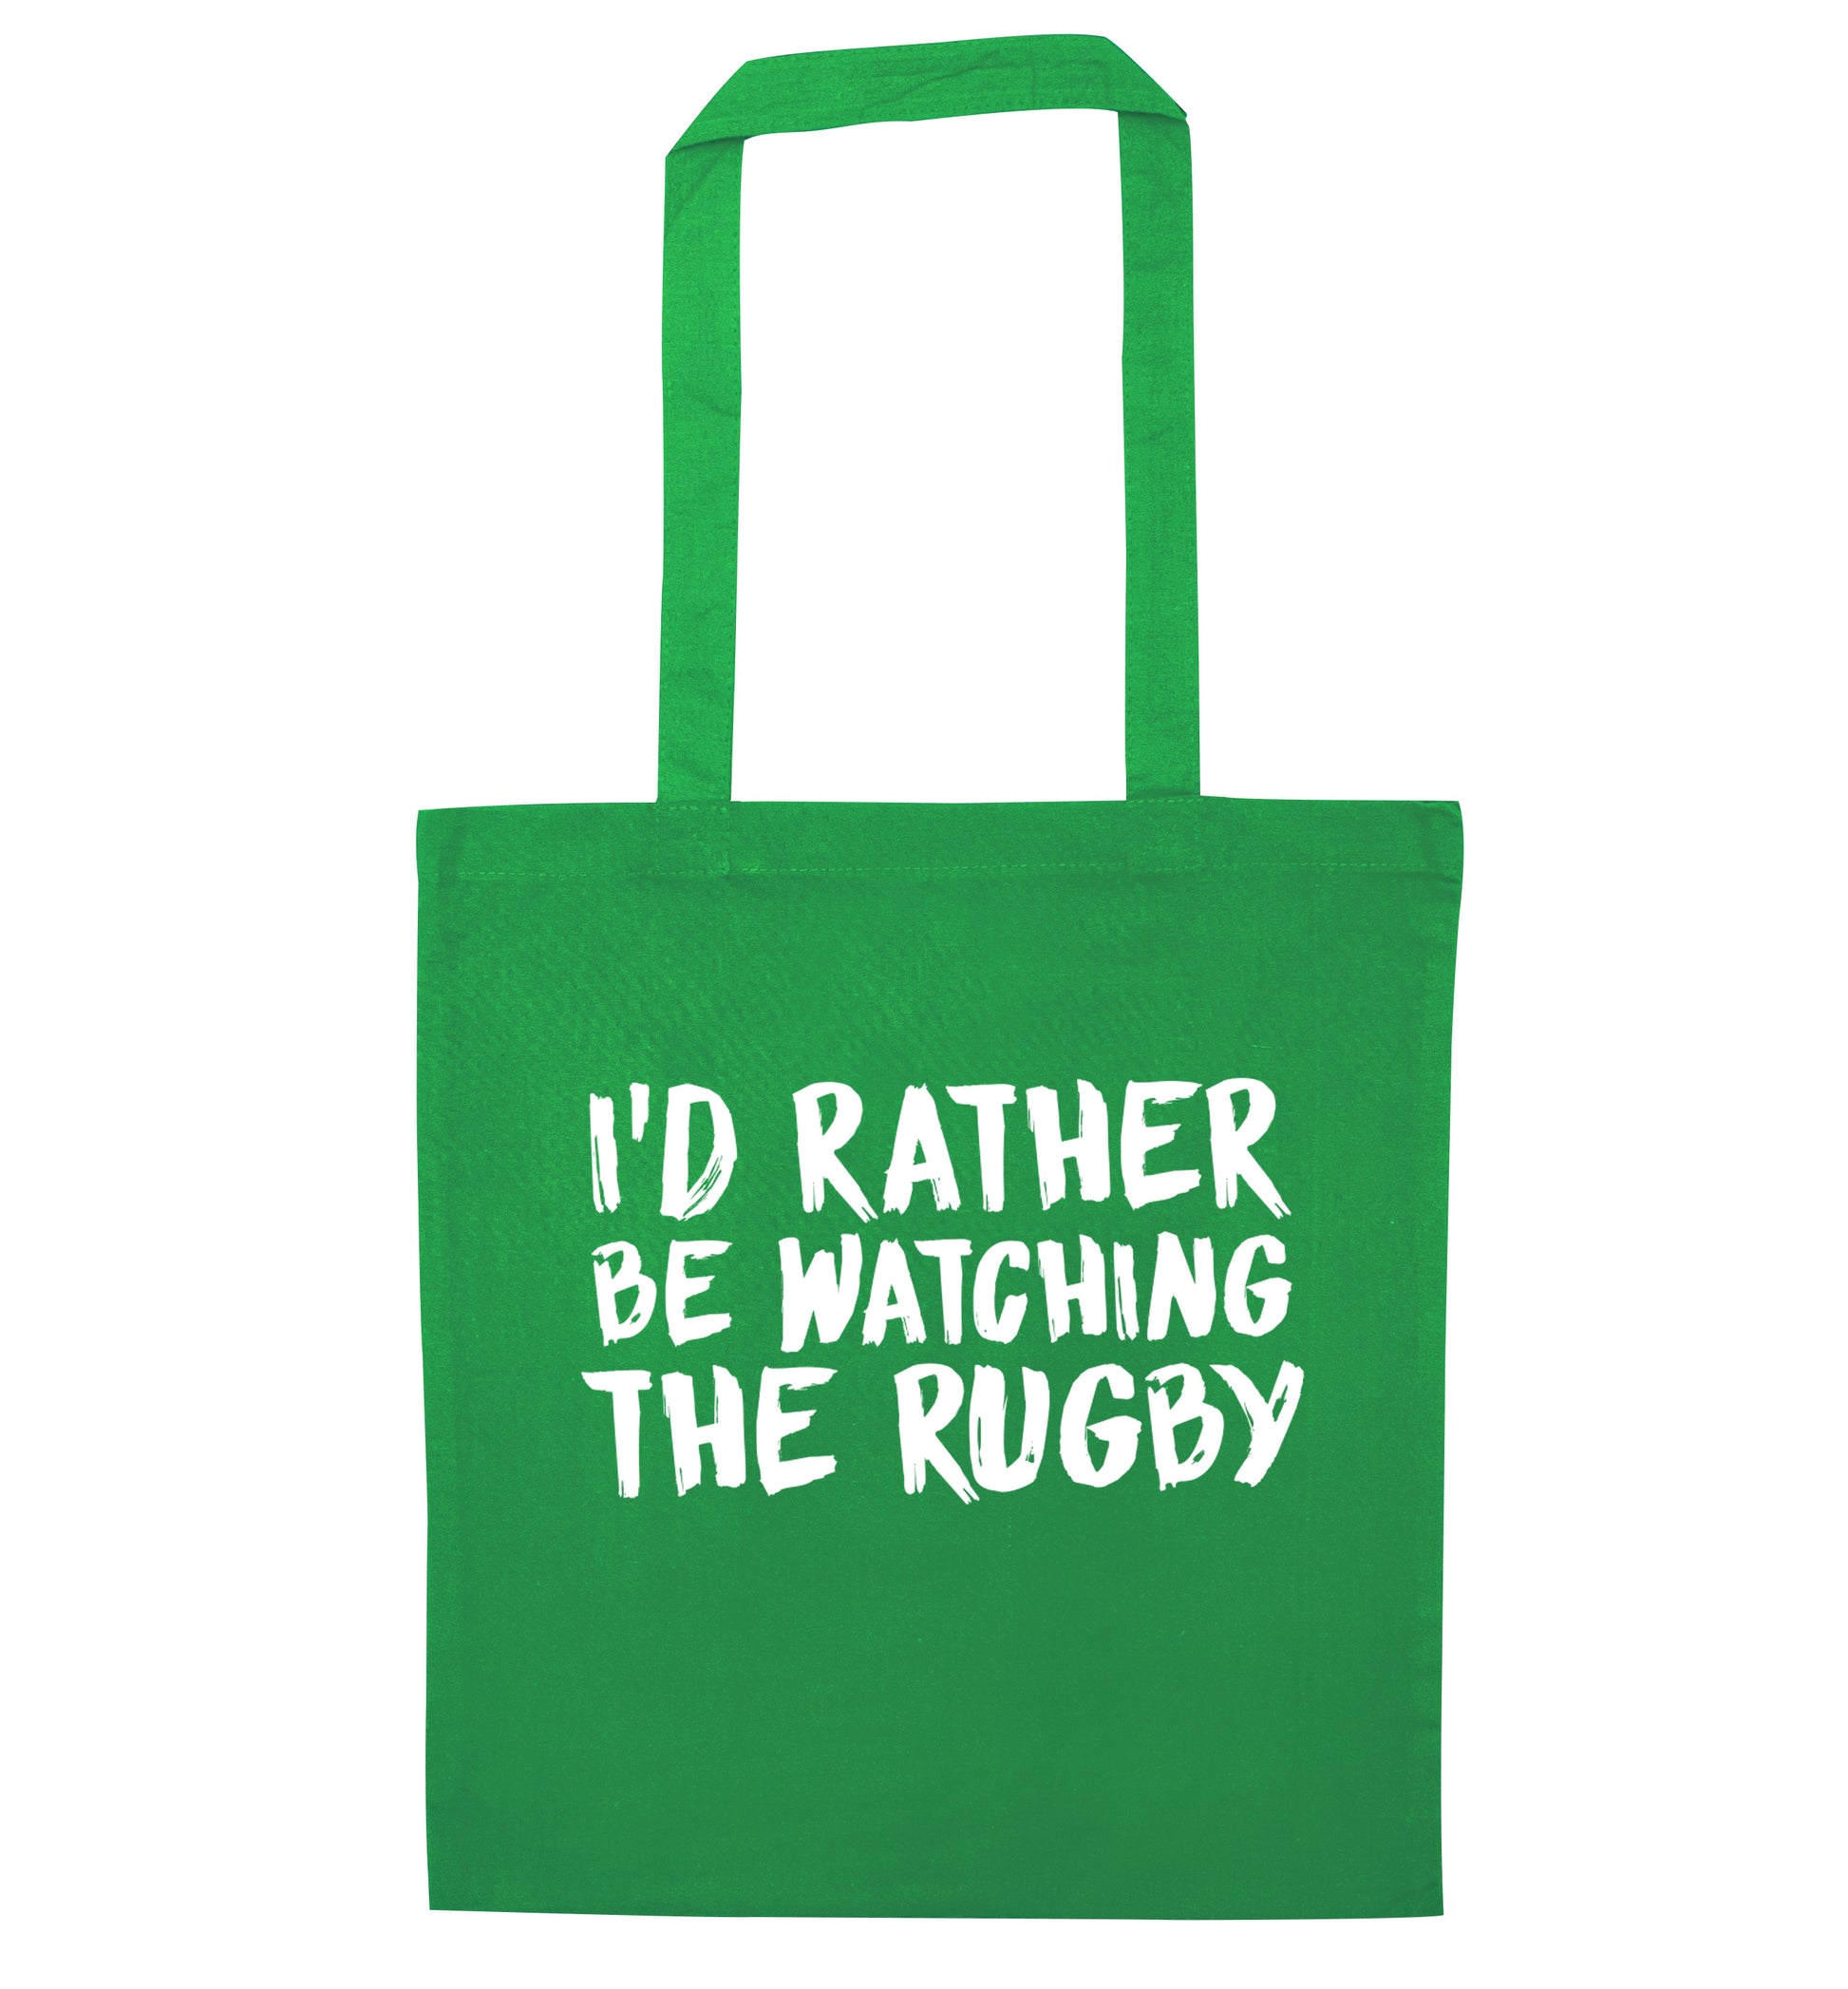 I'd rather be watching the rugby green tote bag